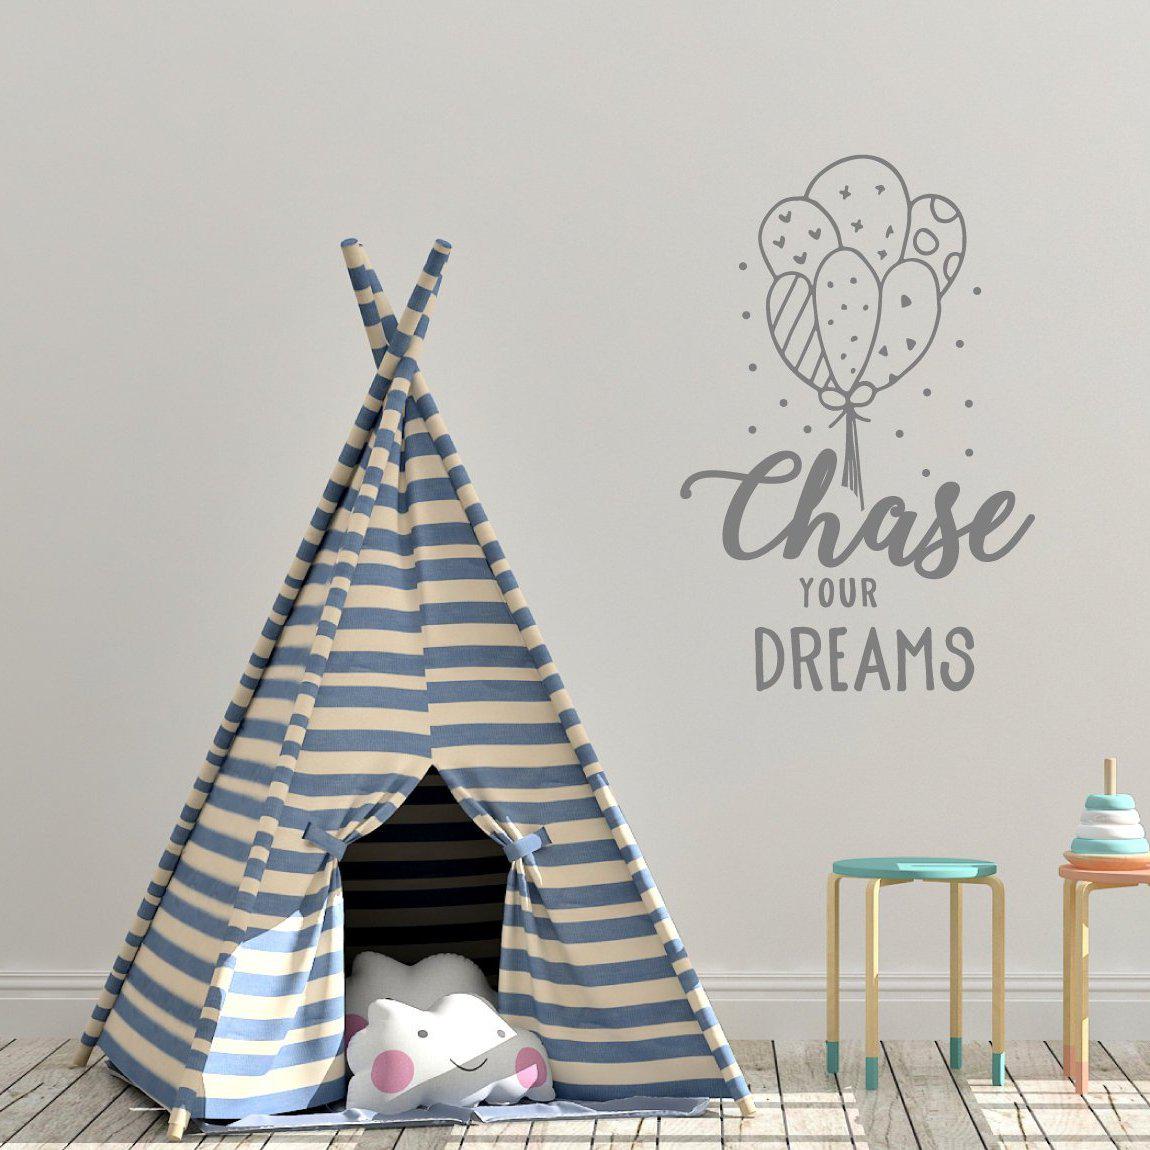 Chase Your Dreams Nursery Wall Sticker Quote